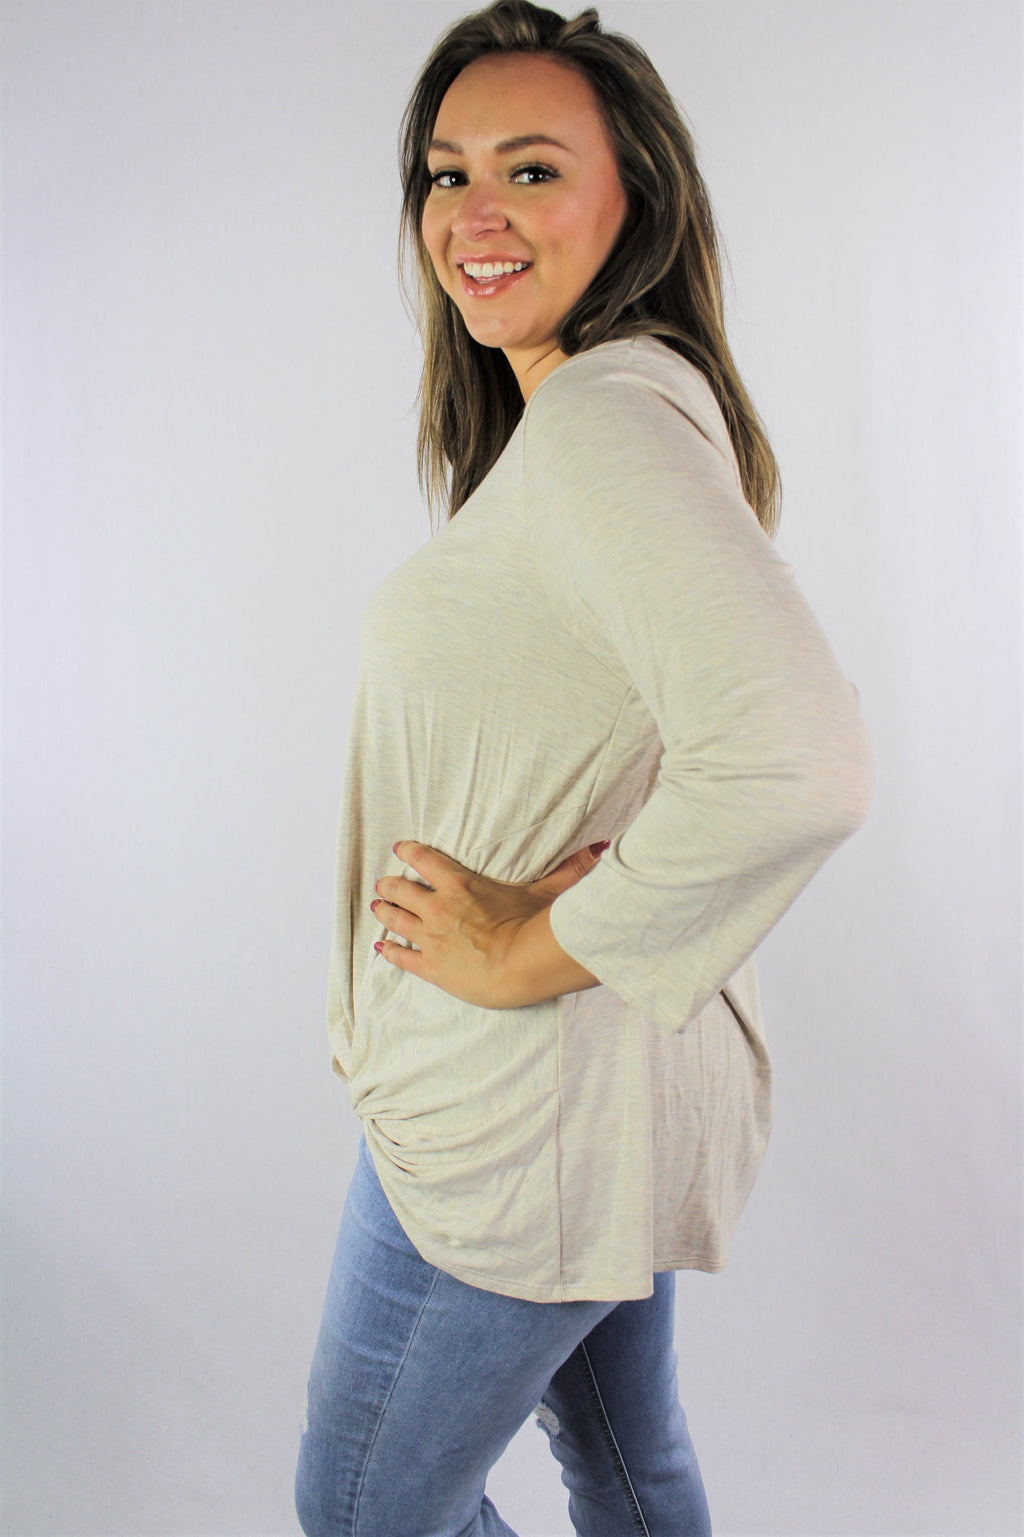 Women's Plus Size Long Sleeve Top with Front Twist *